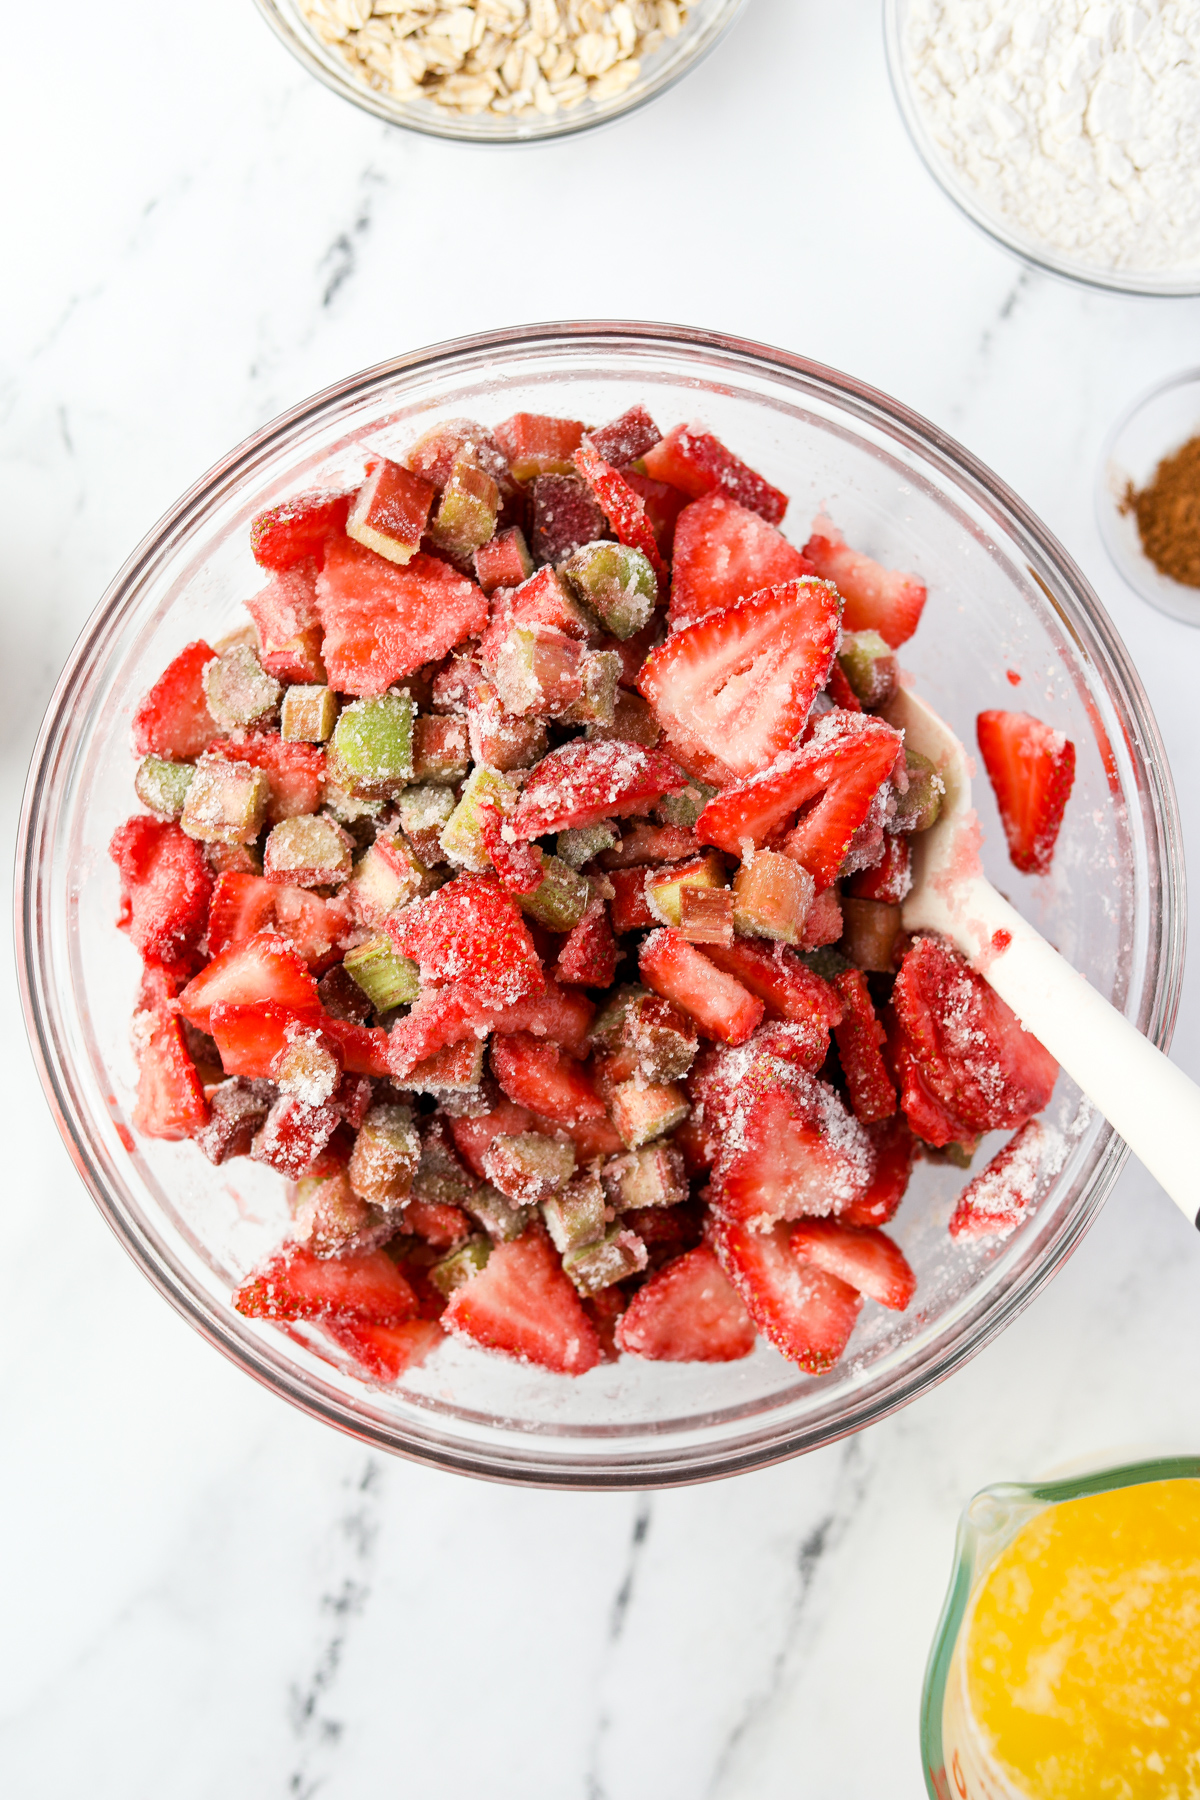 A bowl of strawberries and rhubarb with sugar and flour mixed in.